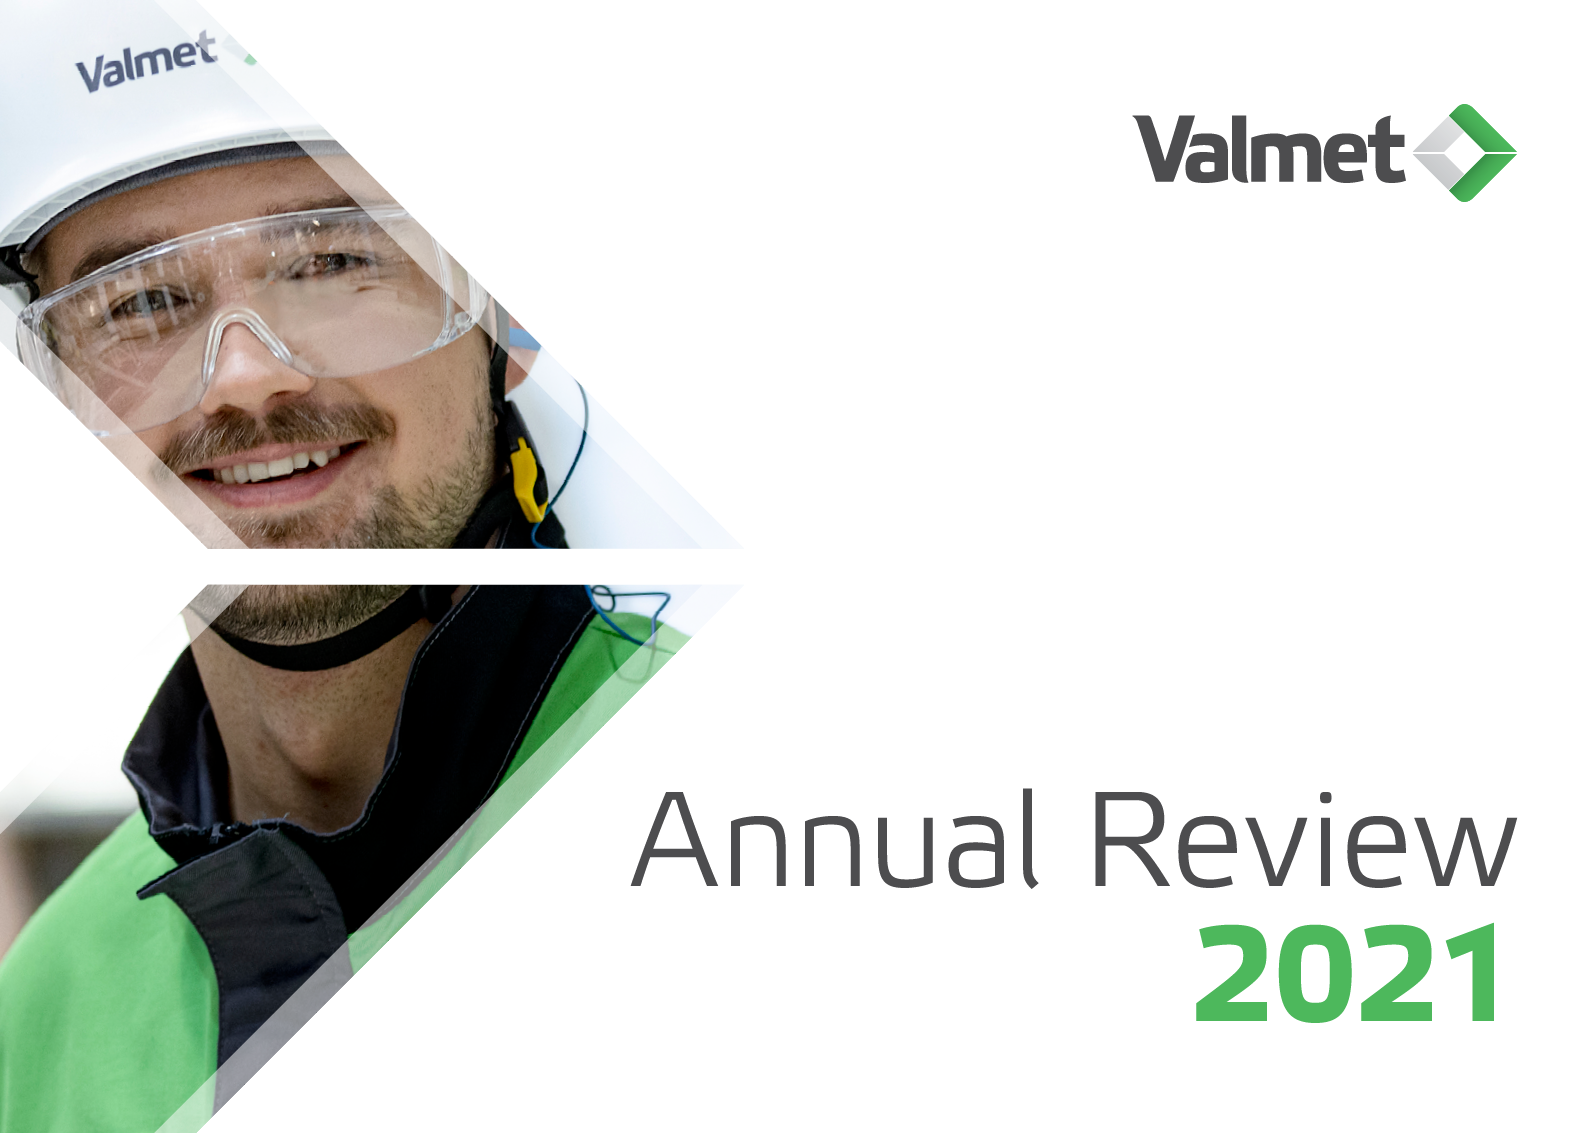 Valmet's Annual Report 2021 published